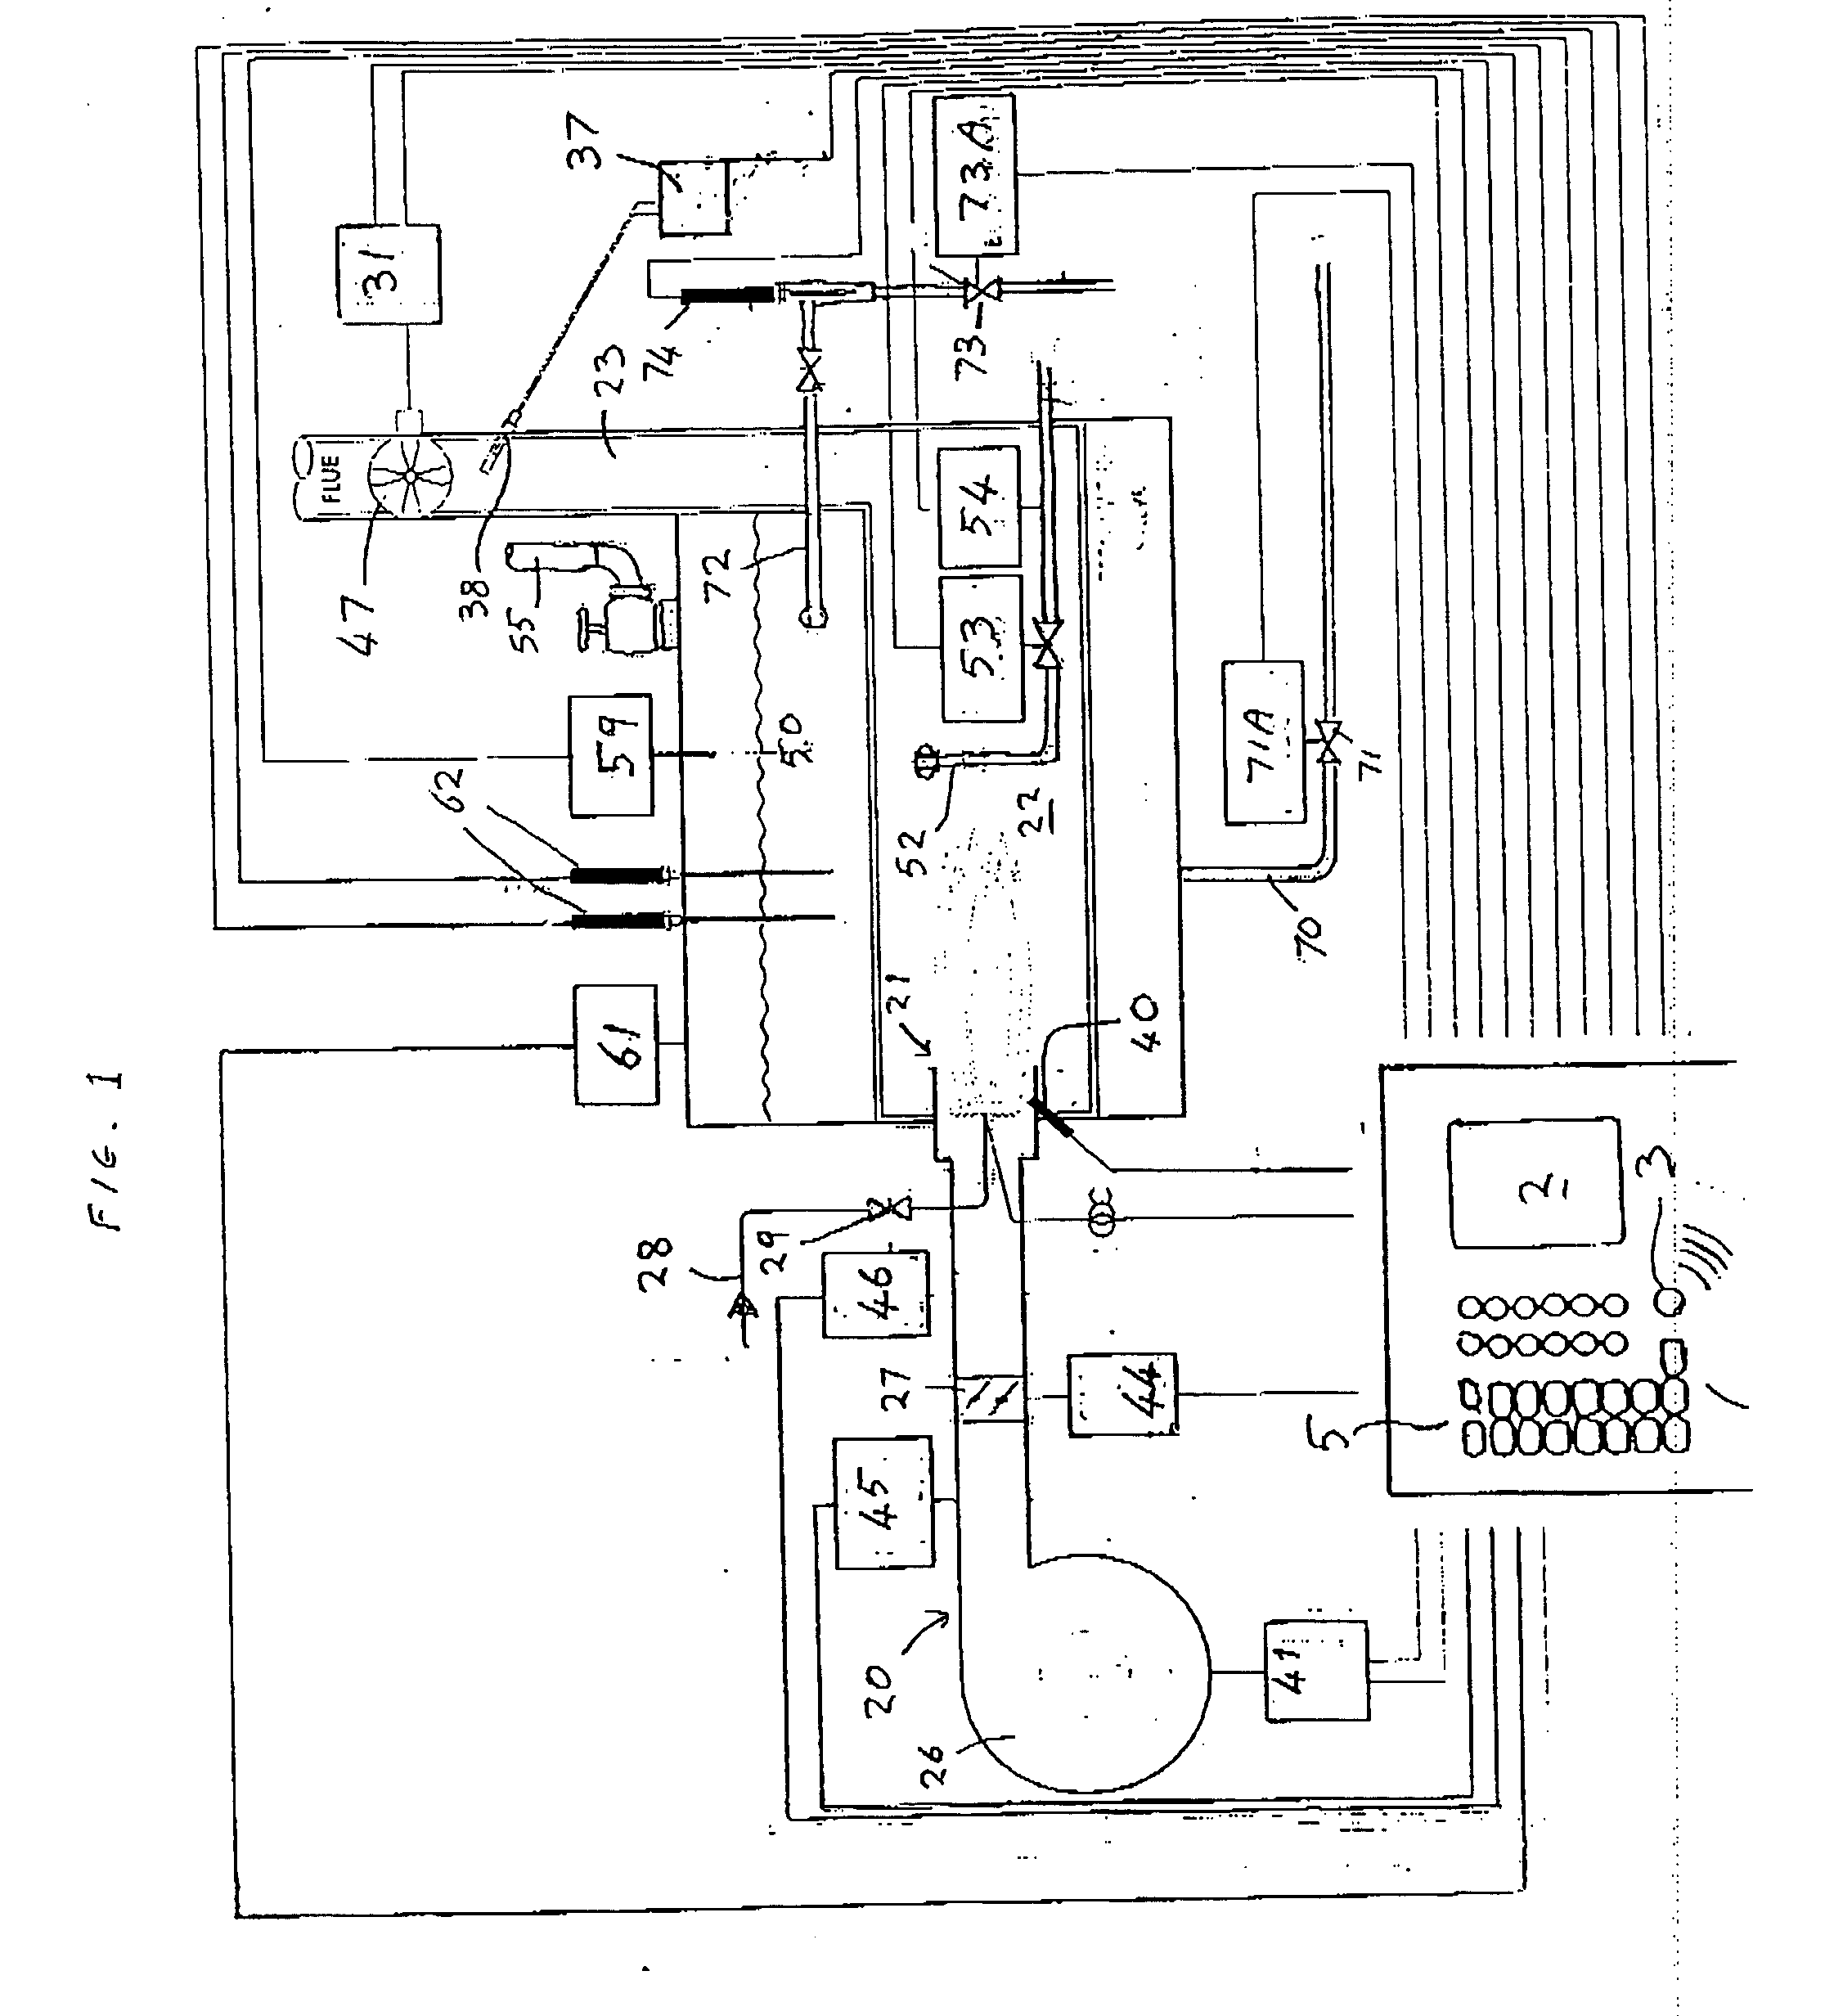 Apparatus and method for measuring total dissolved solids in a steam boiler